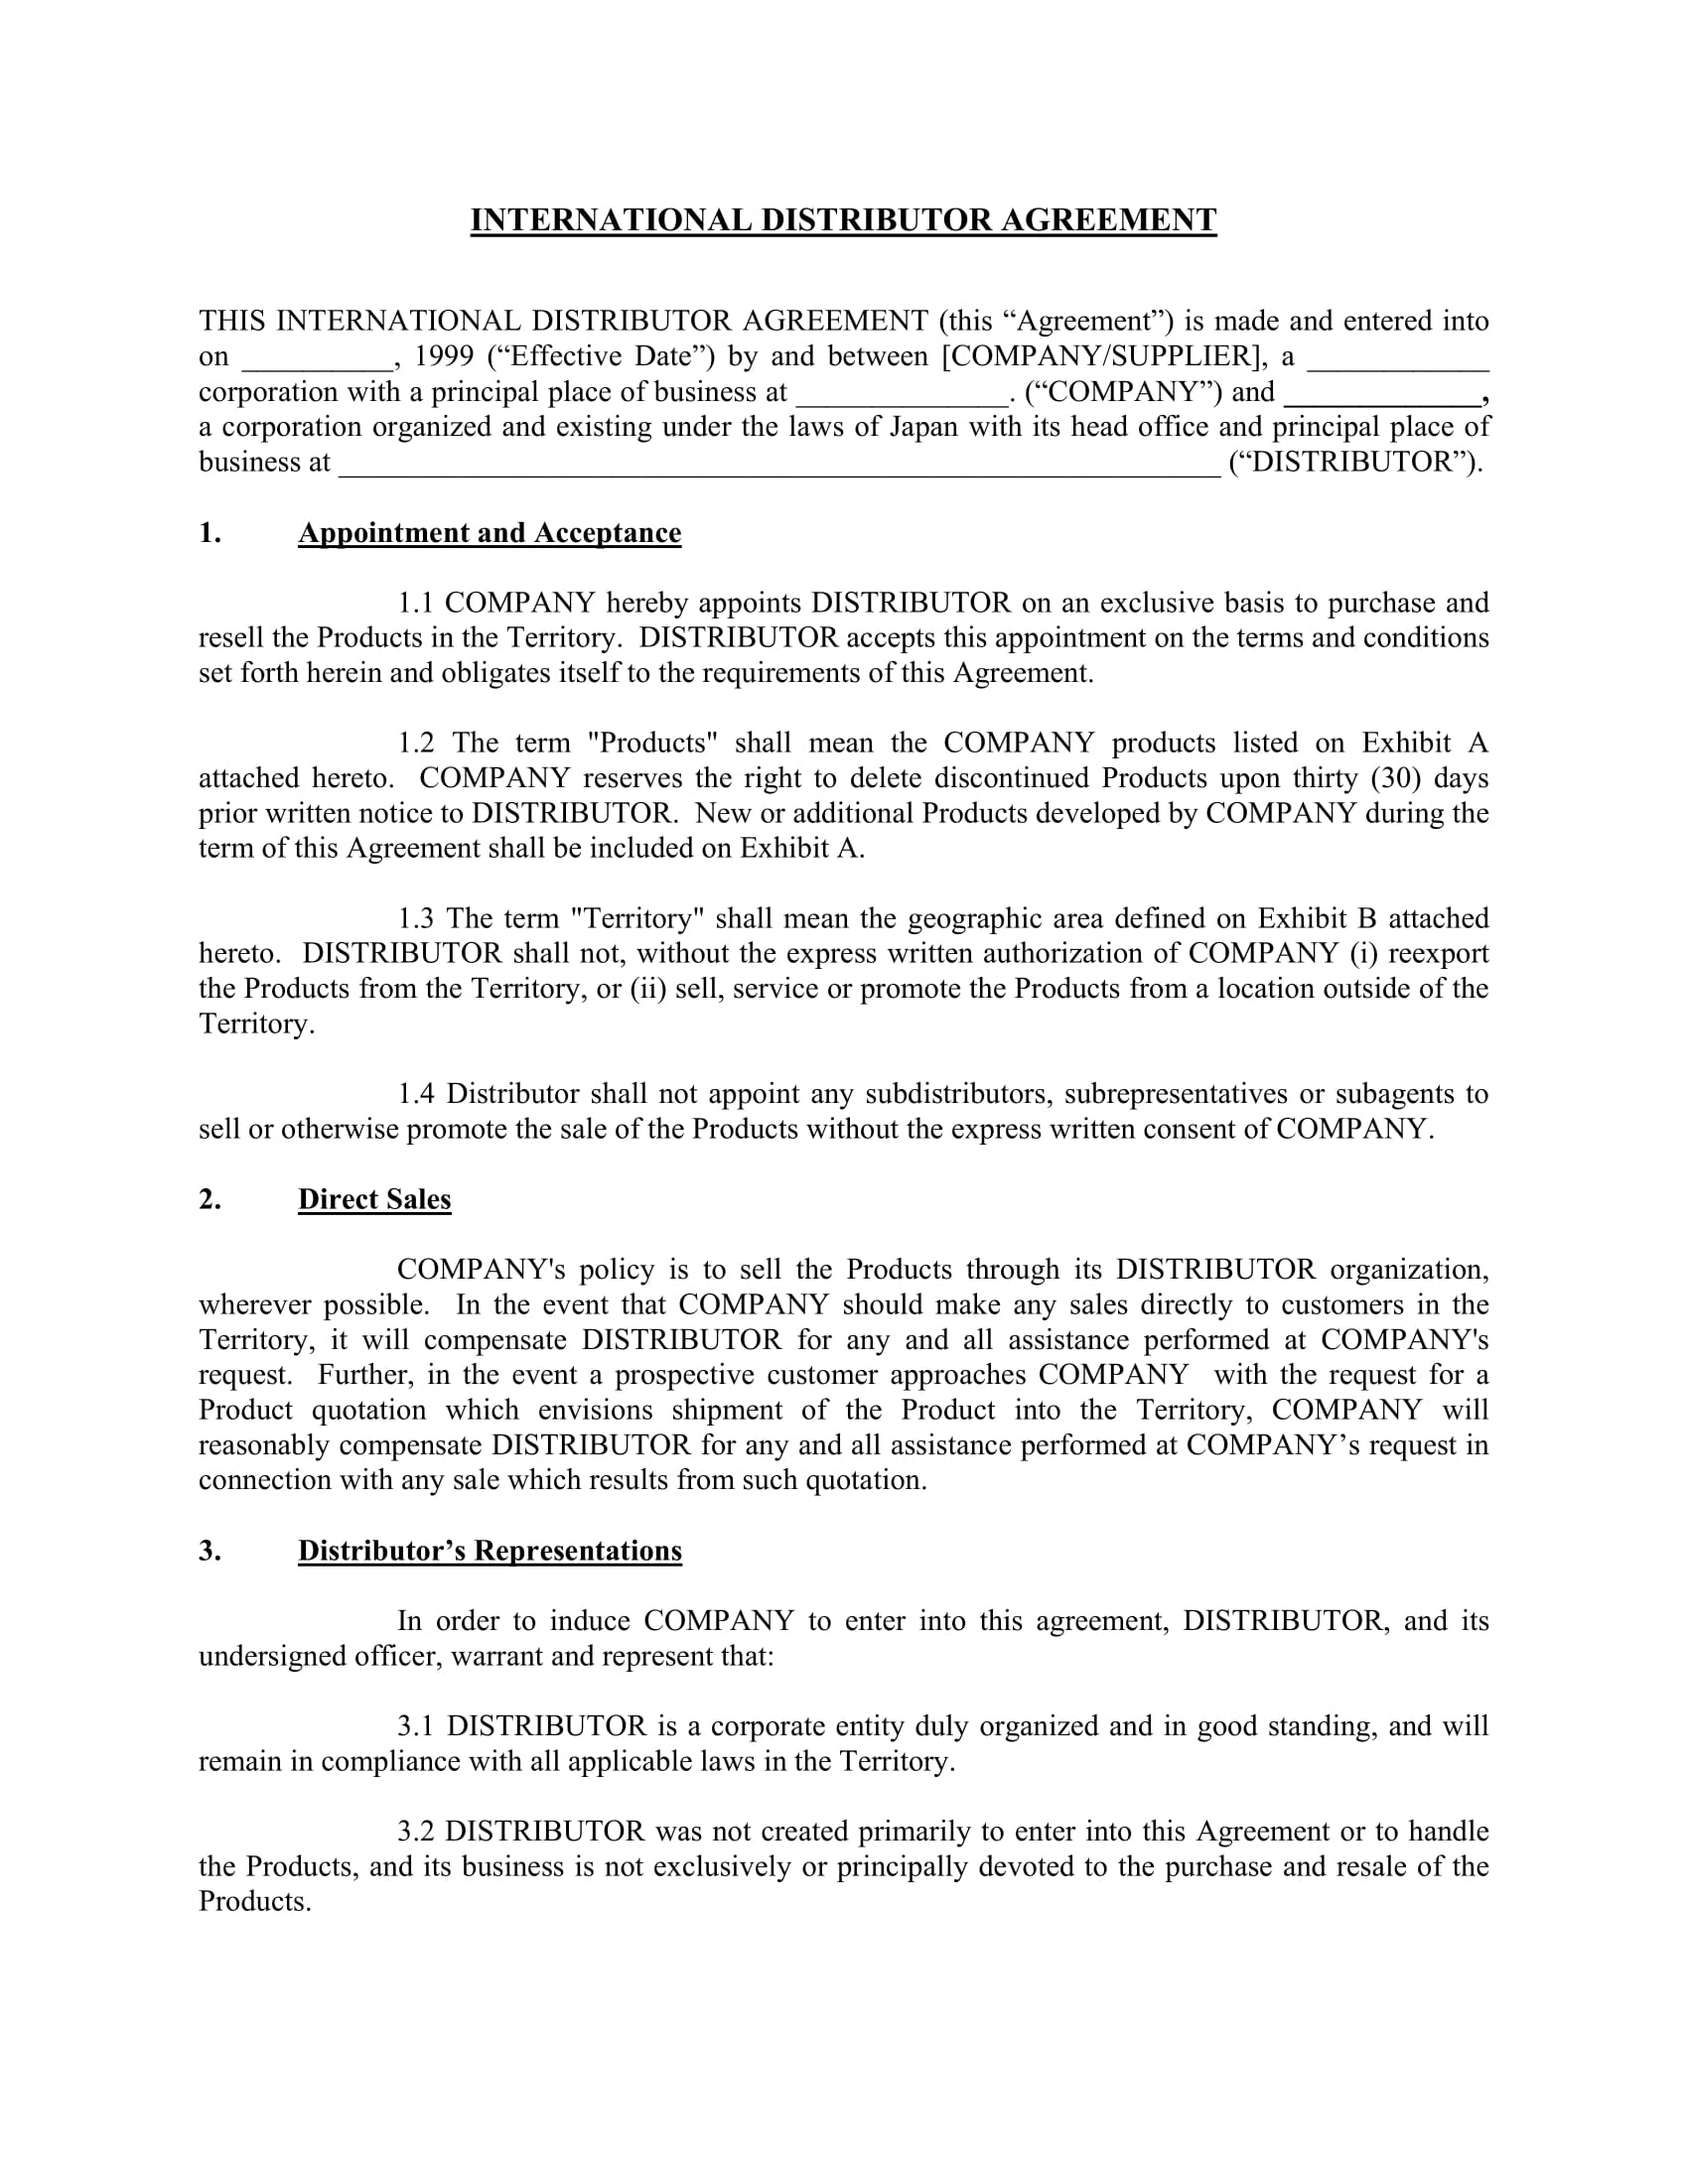 international distribution agreement contract form 1